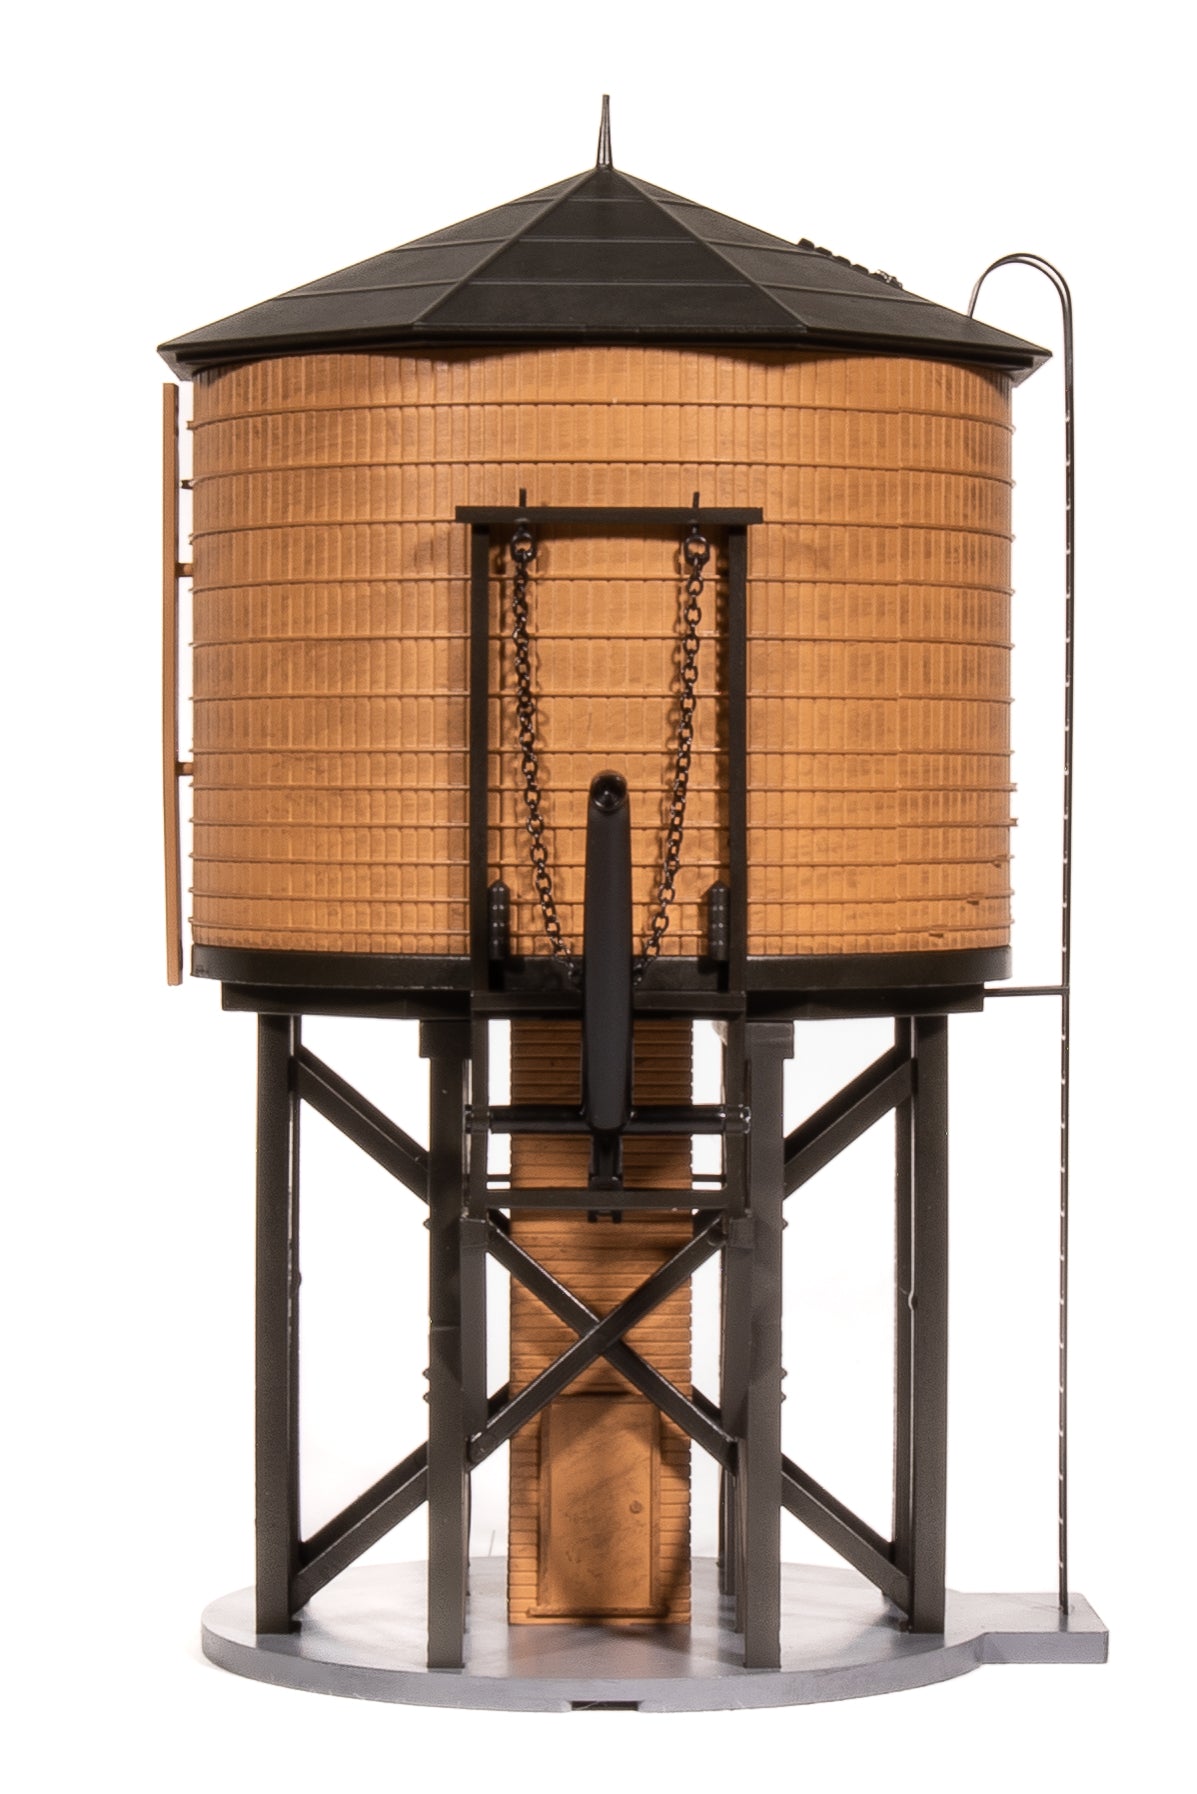 7921 Operating Water Tower w/ Sound, NP, Weathered, HO